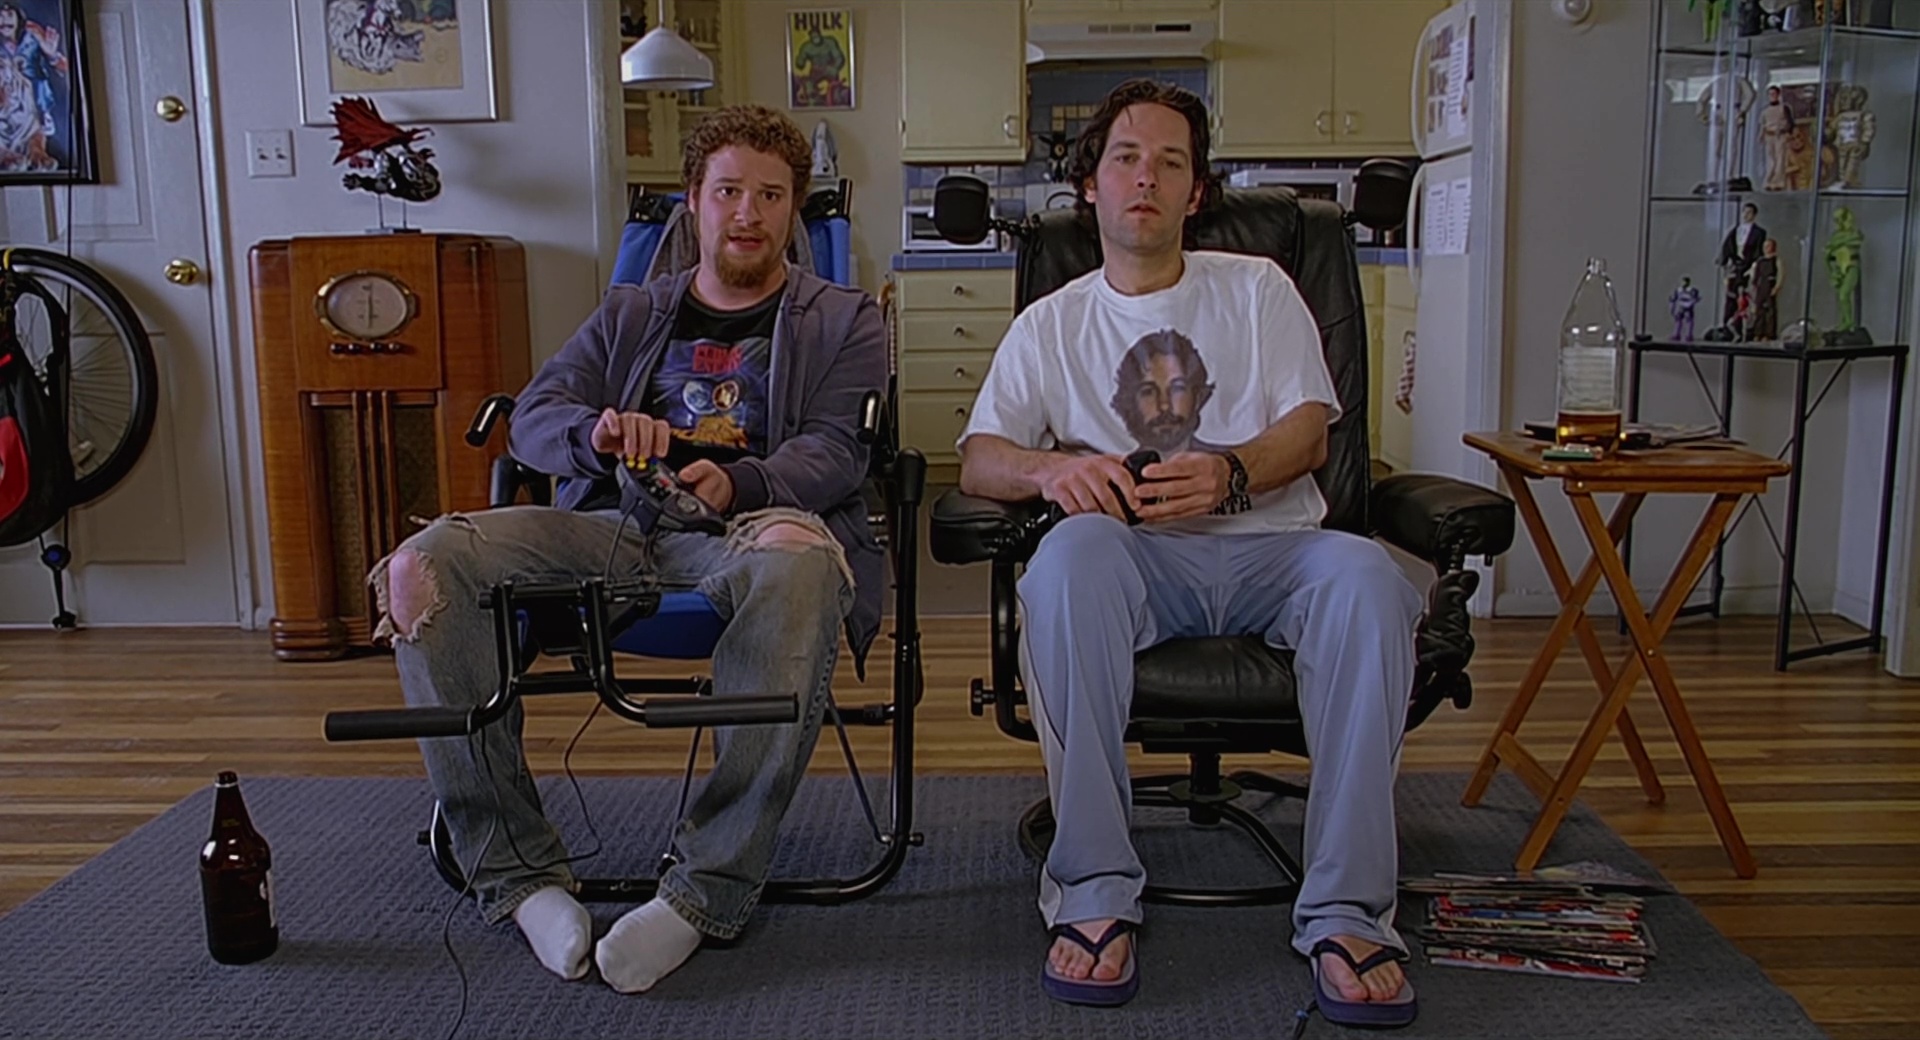 Xbox And Panasonic TV Used by Seth Rogen and Paul Rudd in The 40-Year-Old V...